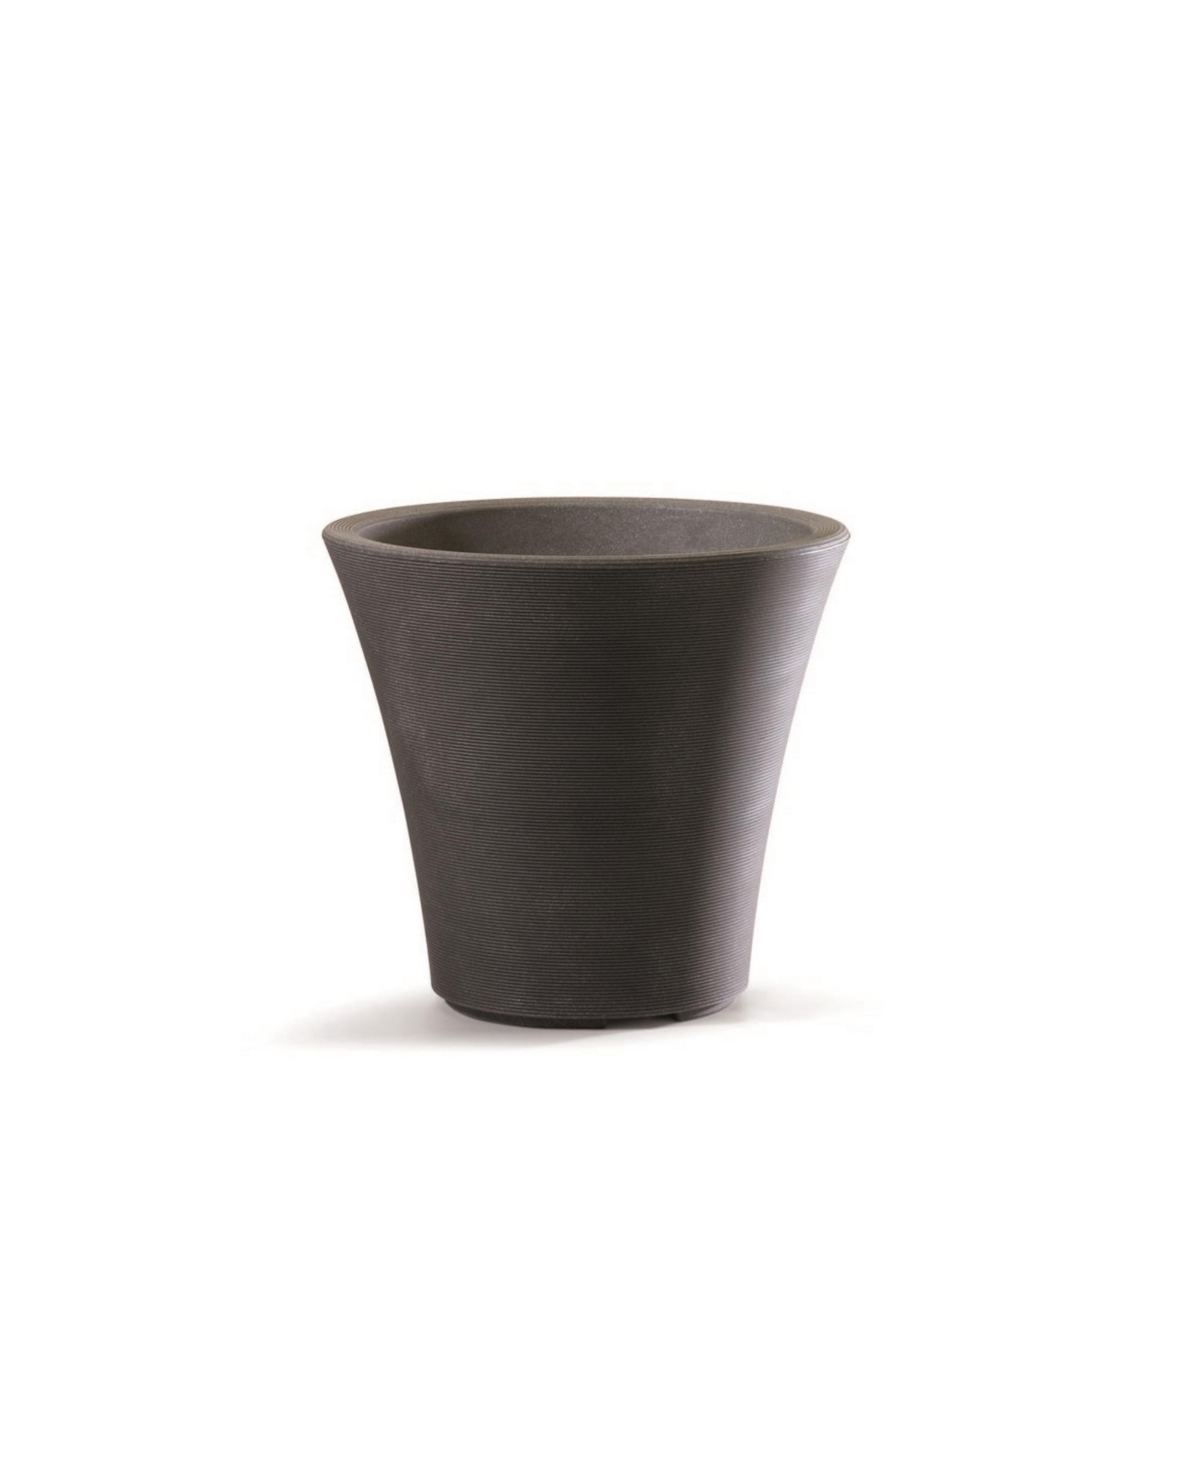 B08316S181 Pamploma Plastic Outdoor Planter Cappuccino 16 Inches - Brown